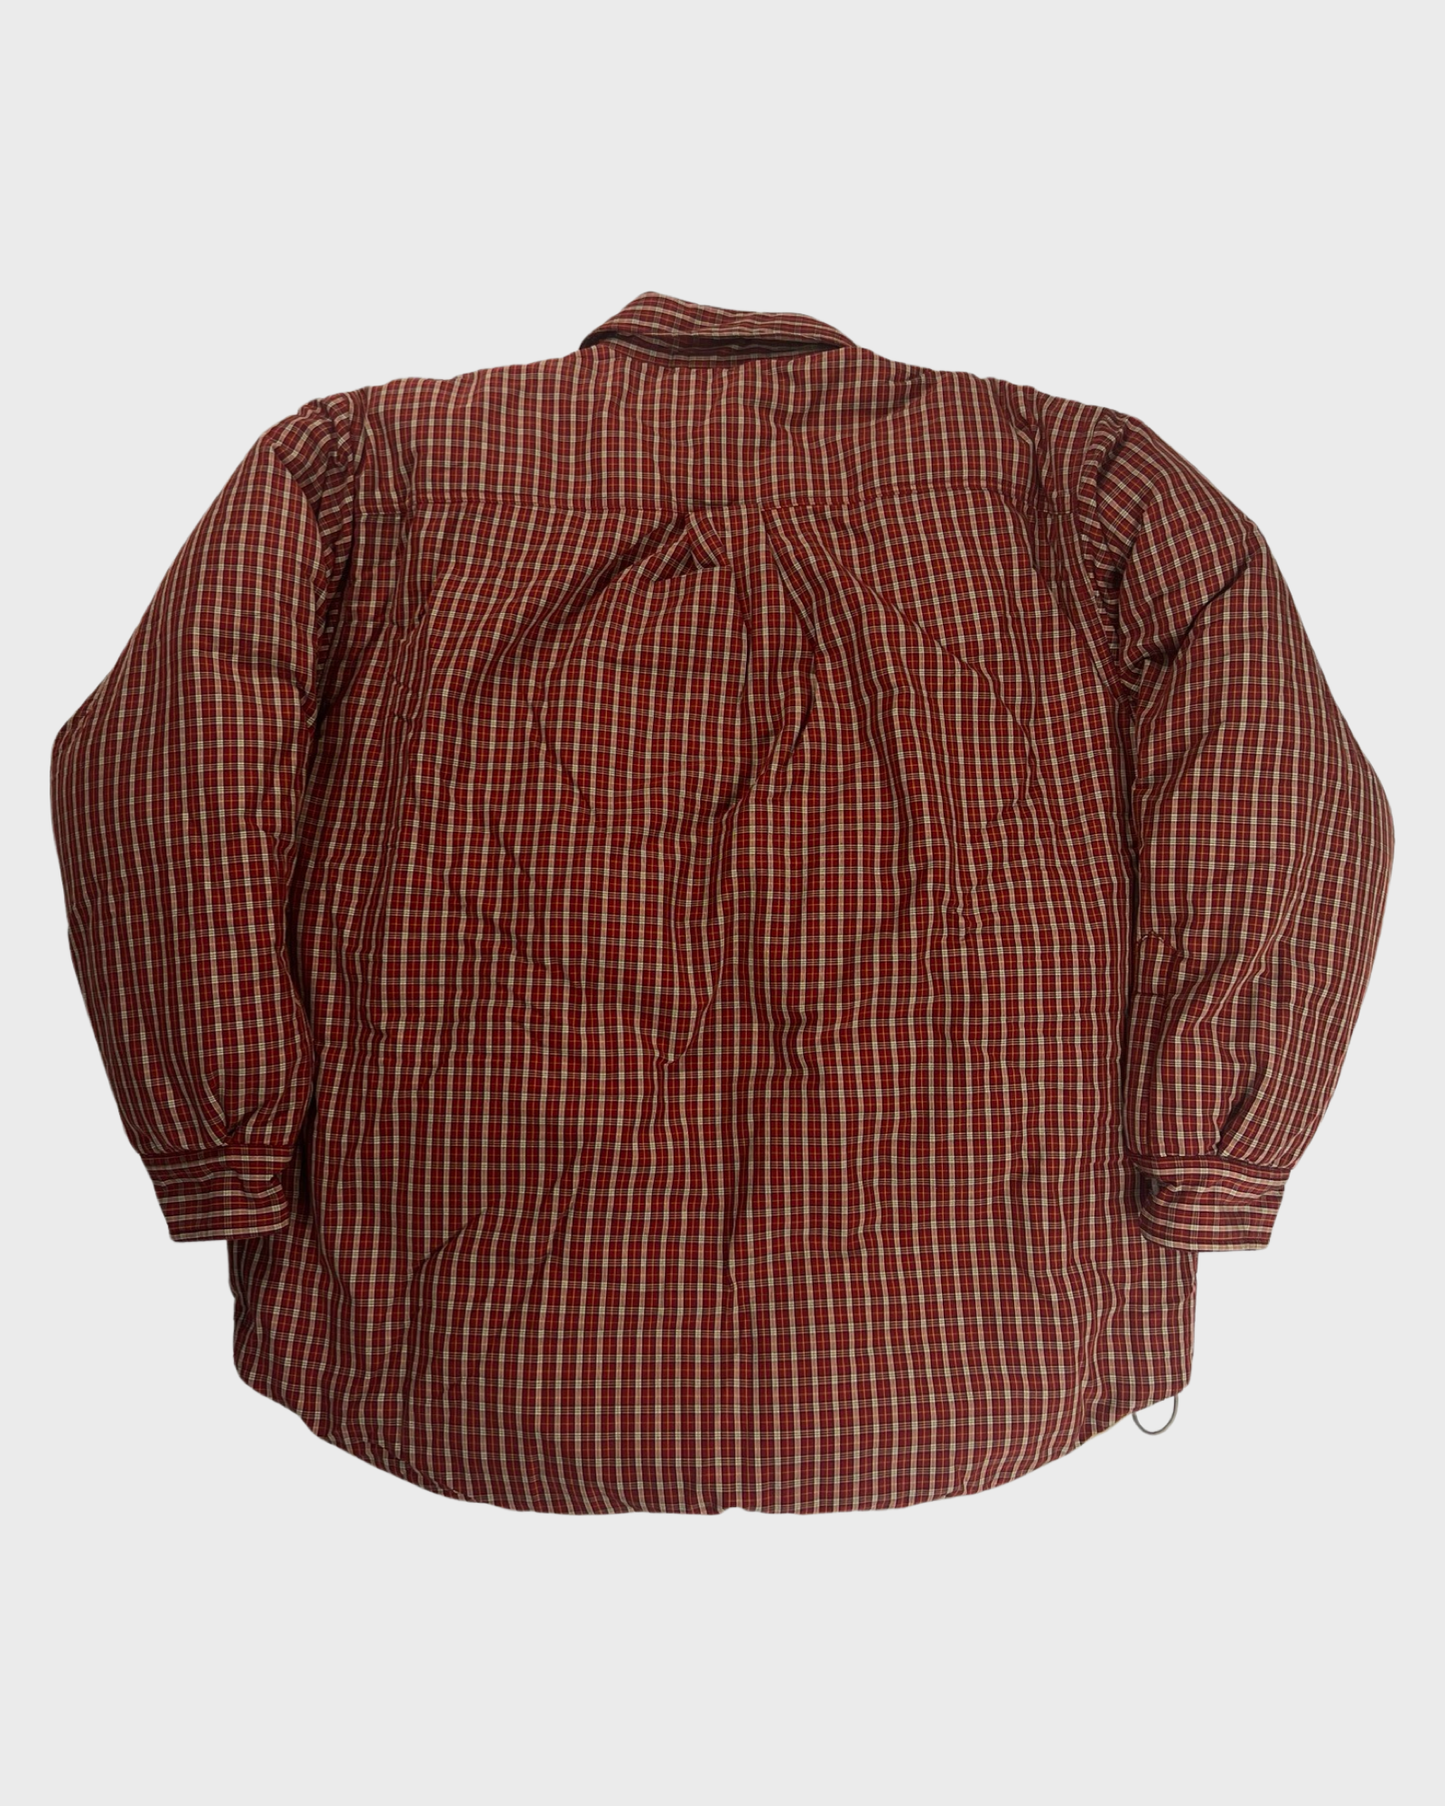 Vetements AW17 checkered runway fleece lined padded Jacket SZ:L